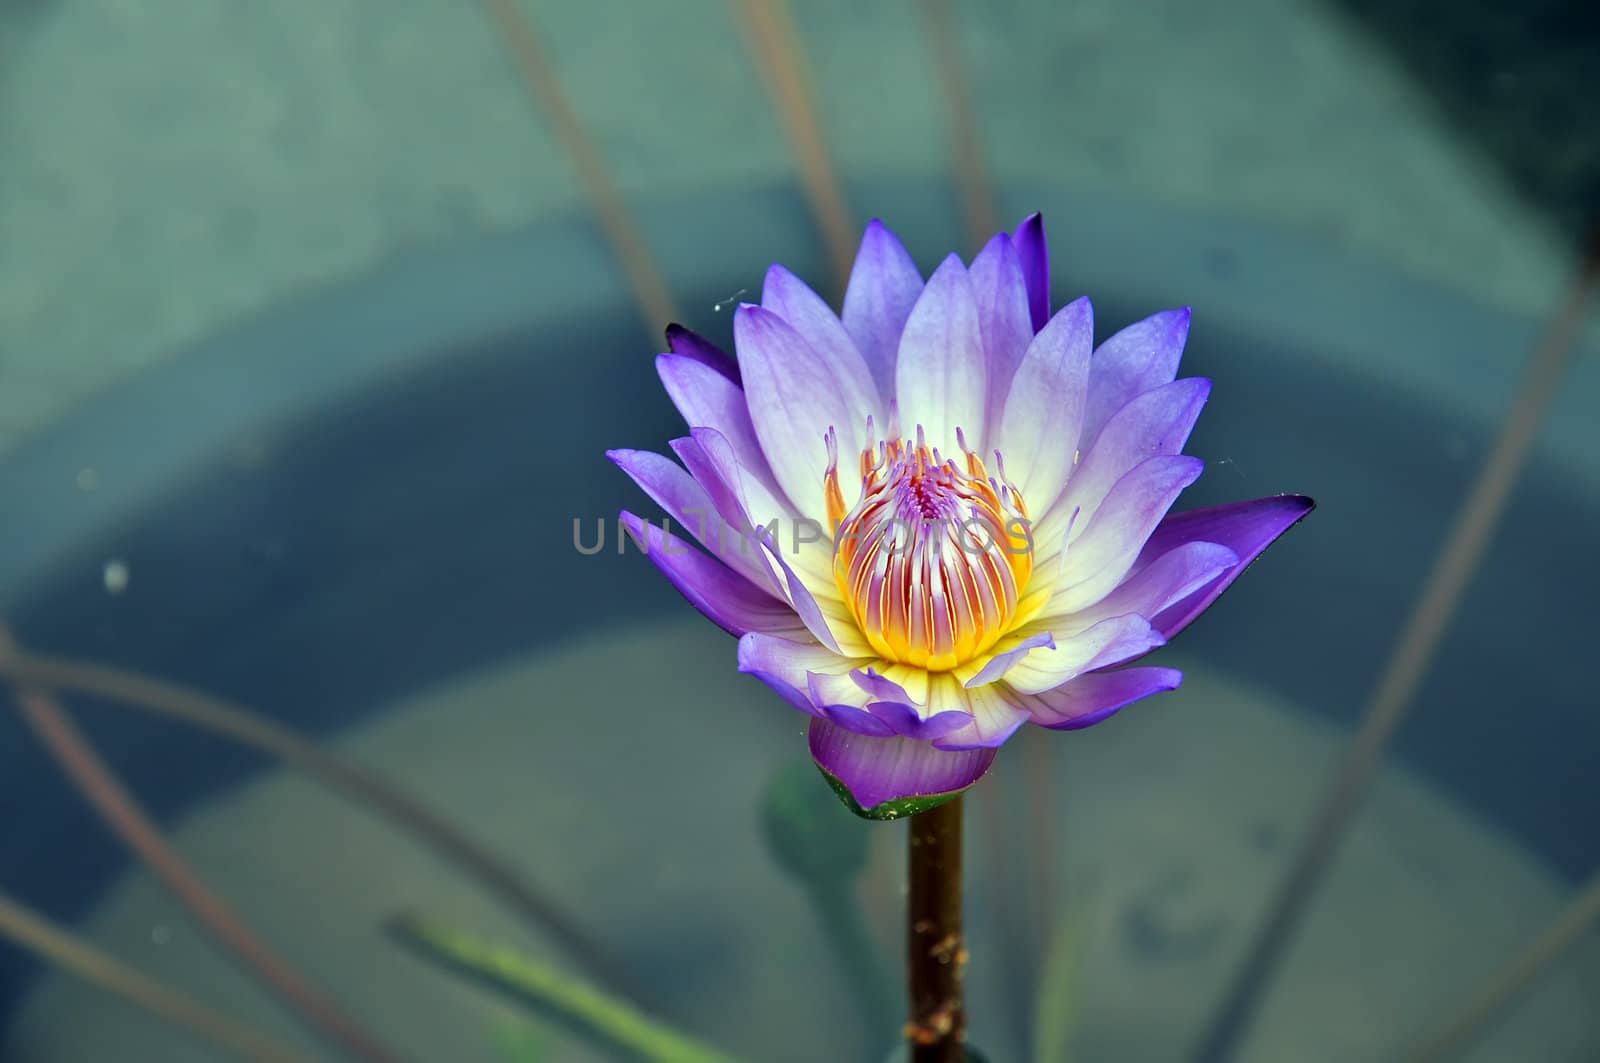 Purple Lotus grows in the pond